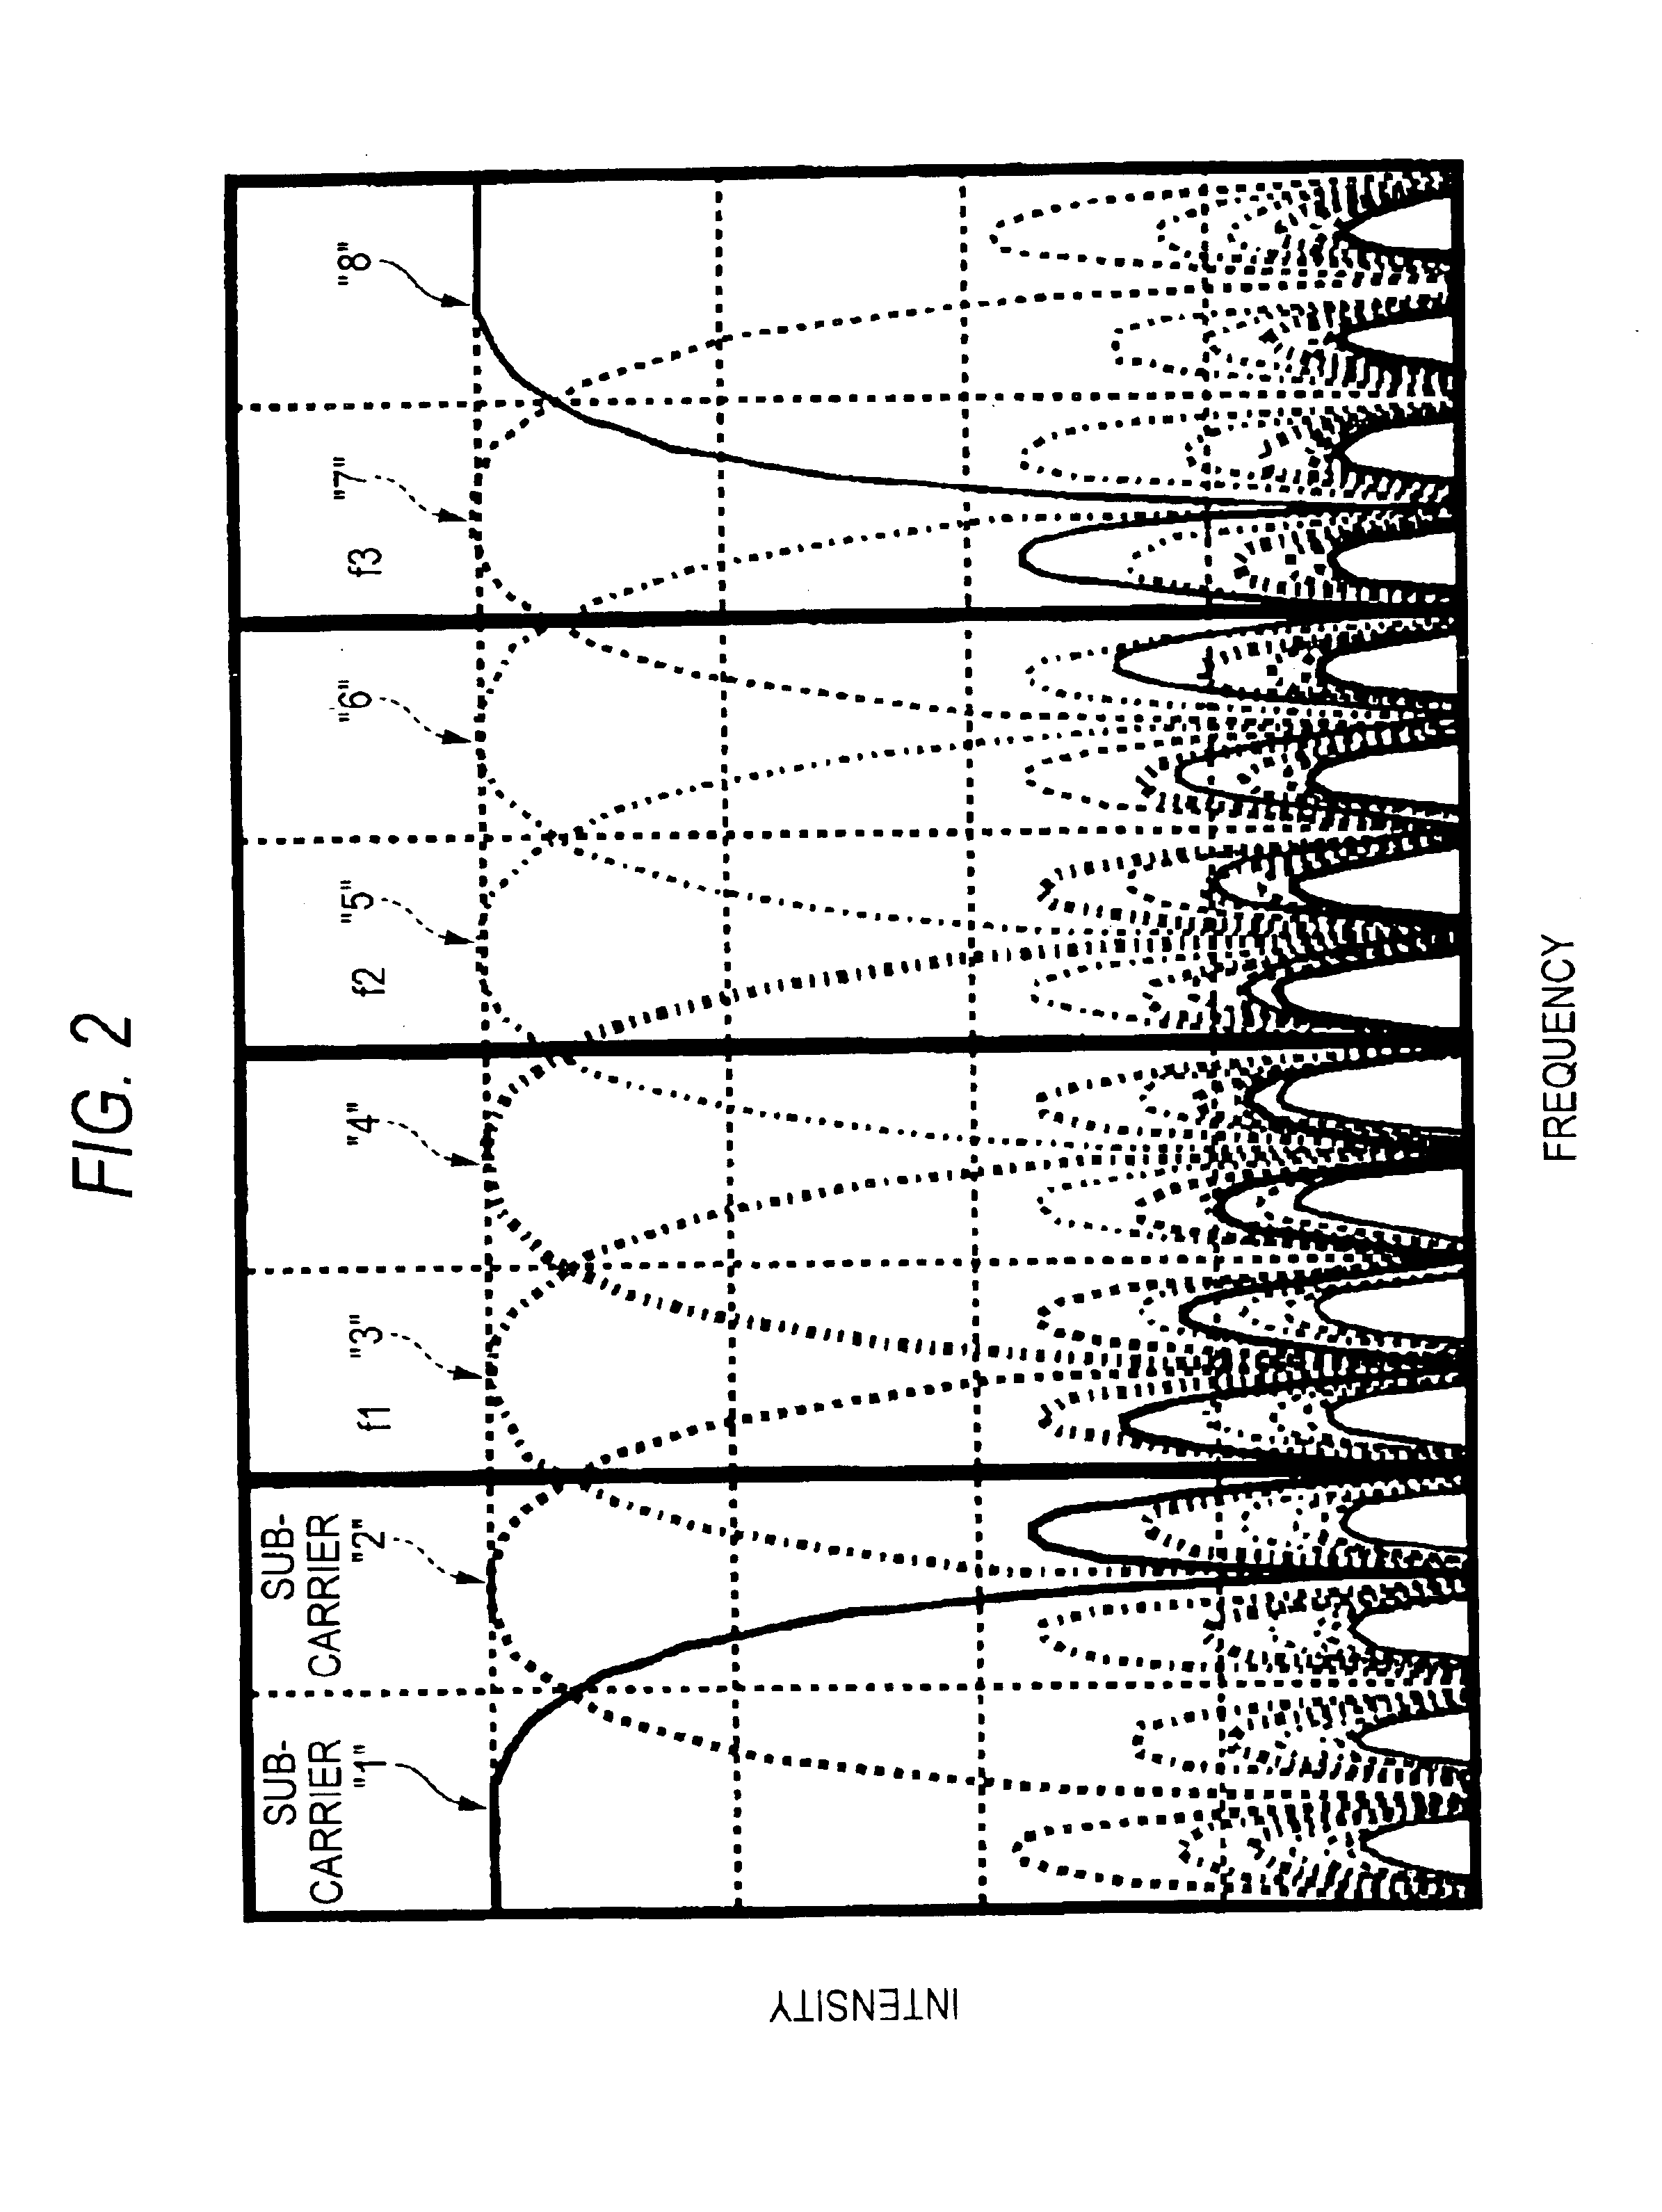 Receiving apparatus and method for digital multi-carrier transmission